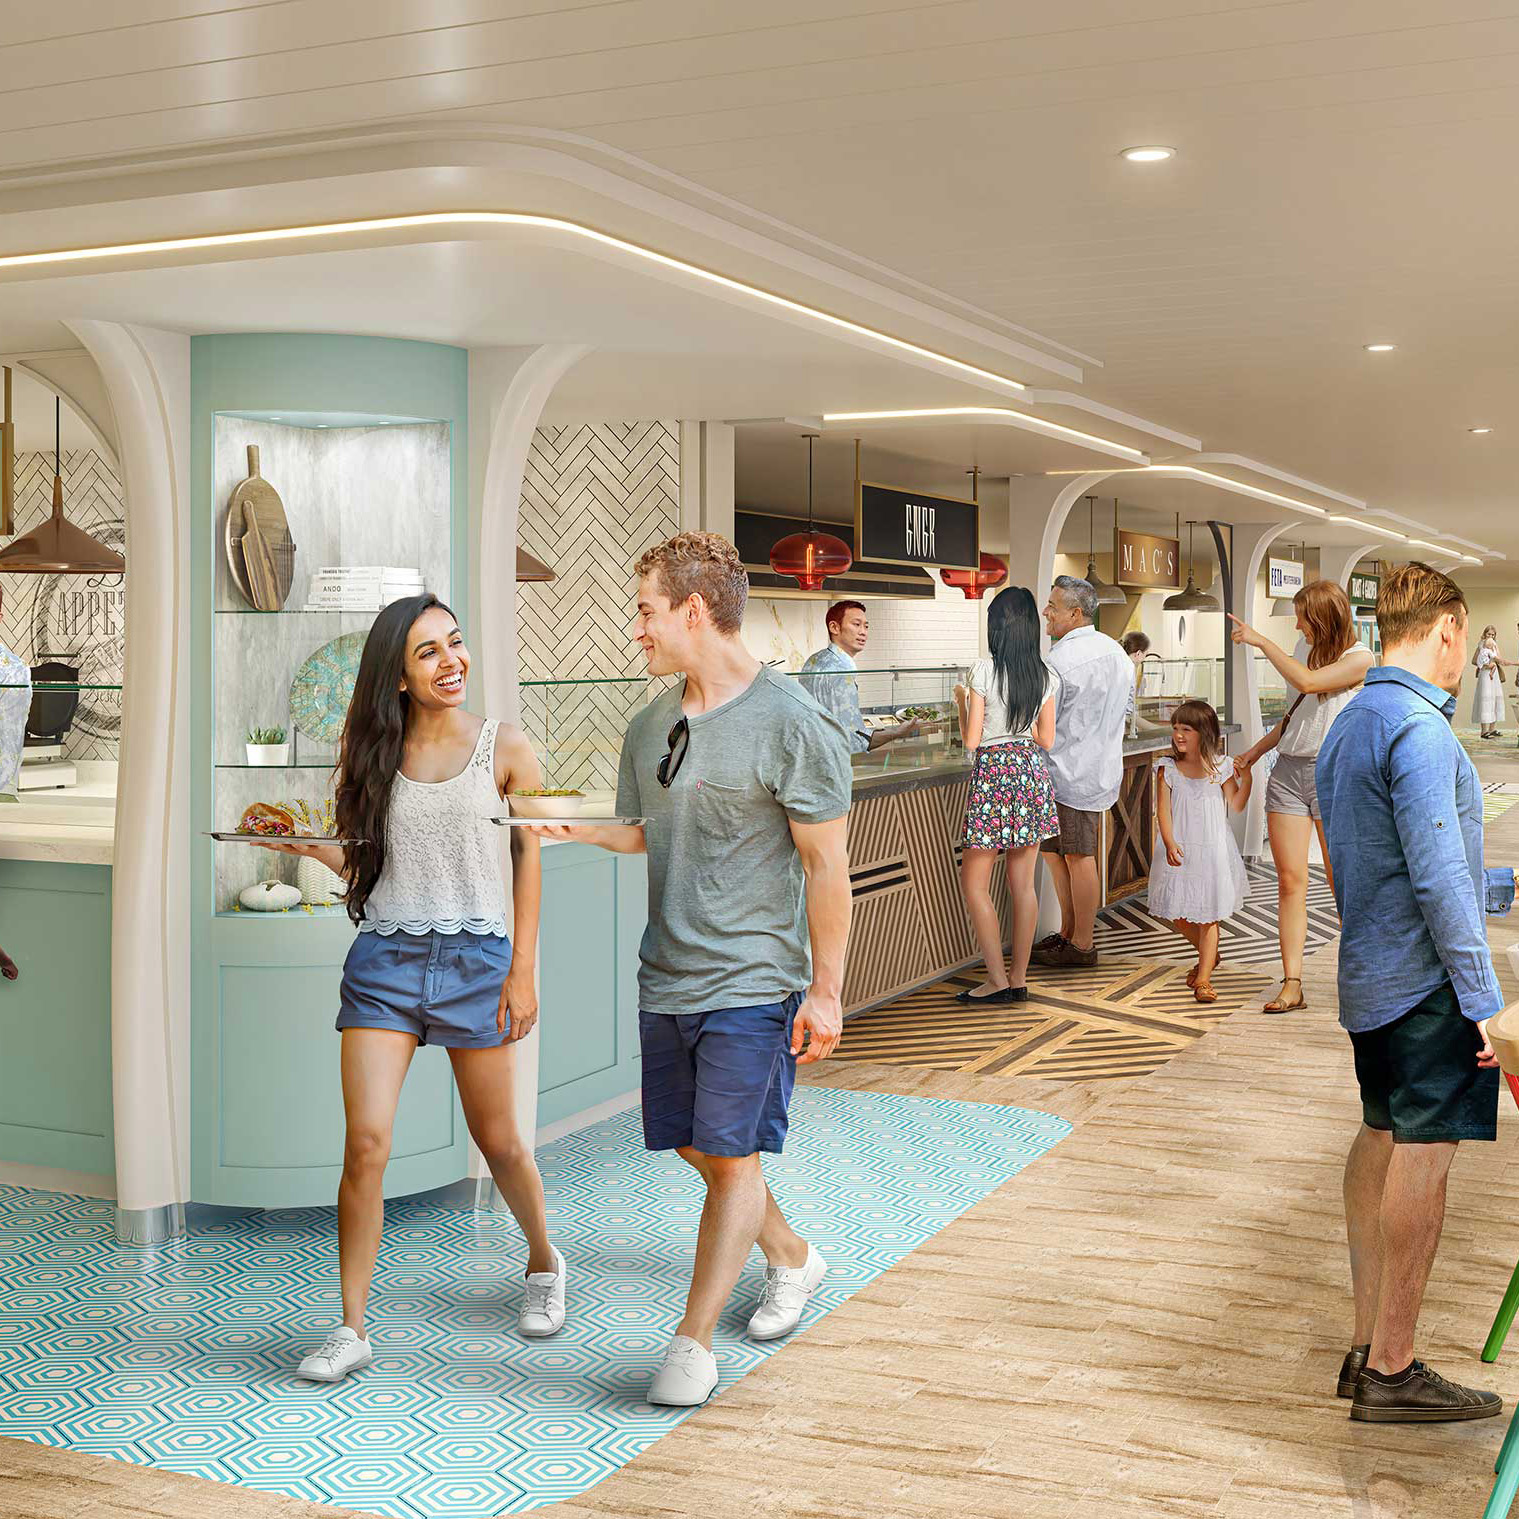 AquaDome Market, Royal Caribbean’s first food hall, features a range of flavors across five different stalls and a selection of wines and beer on Icon of the Seas.